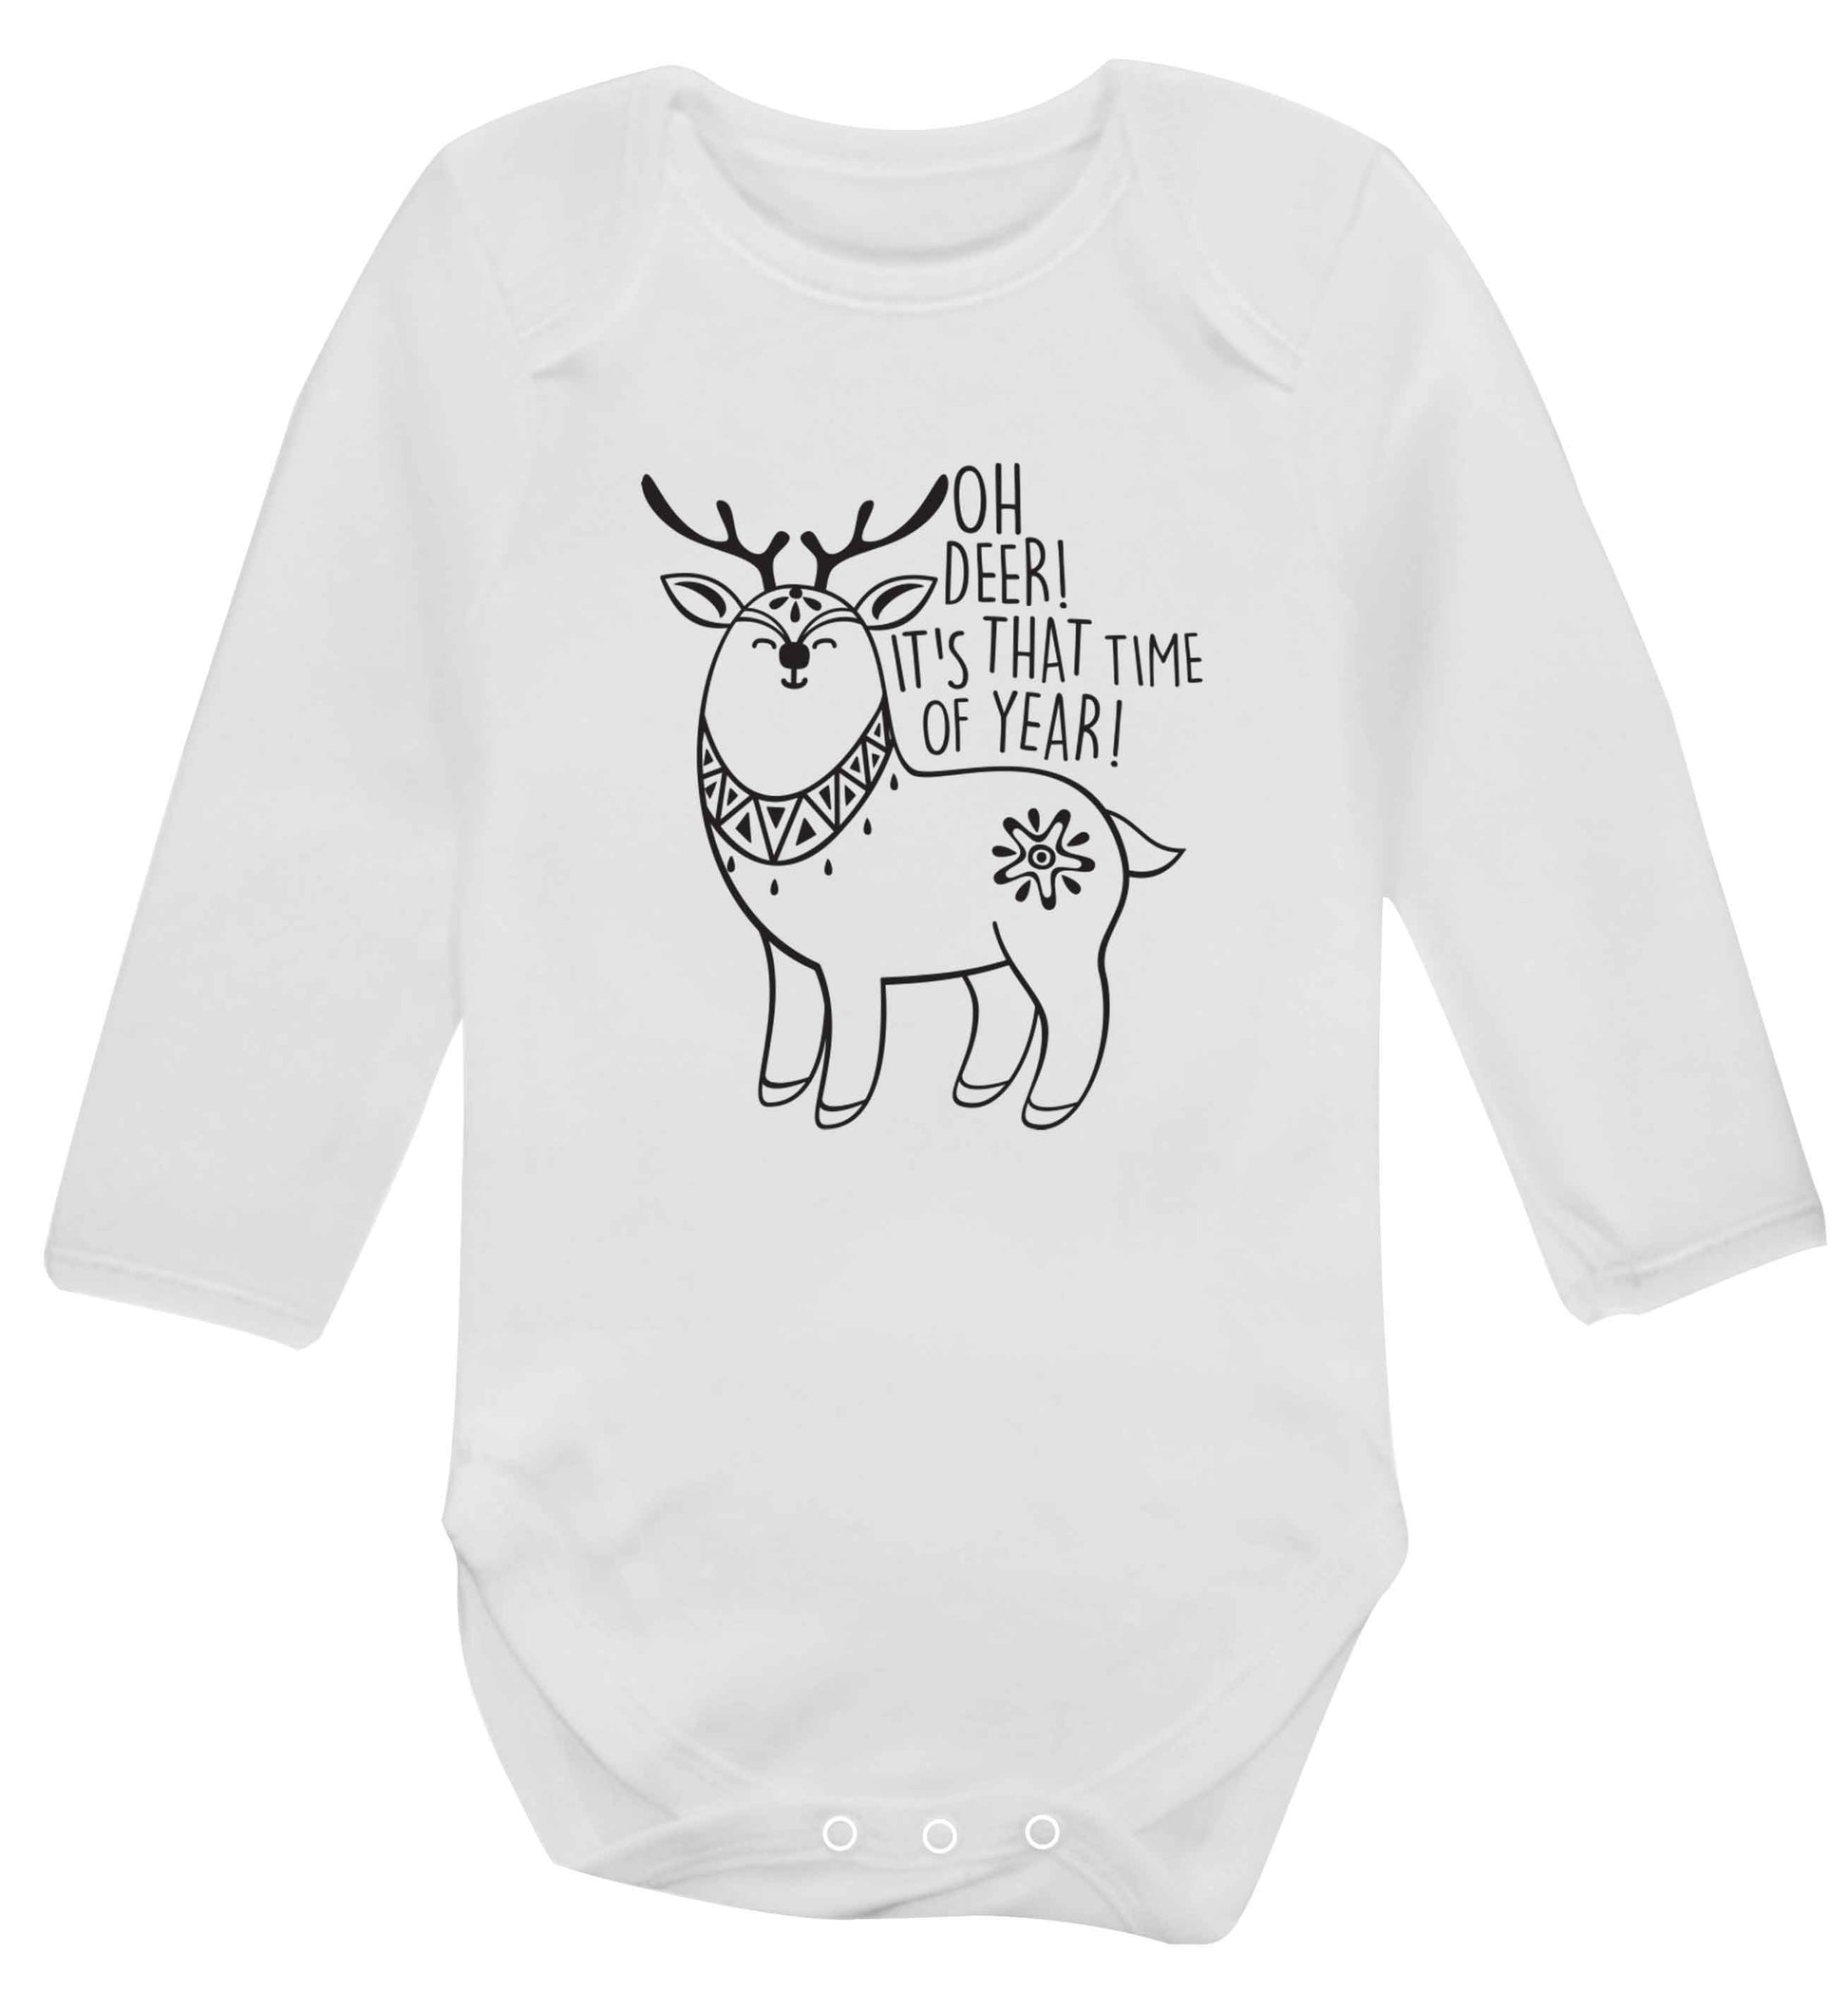 Oh dear it's that time of year Baby Vest long sleeved white 6-12 months